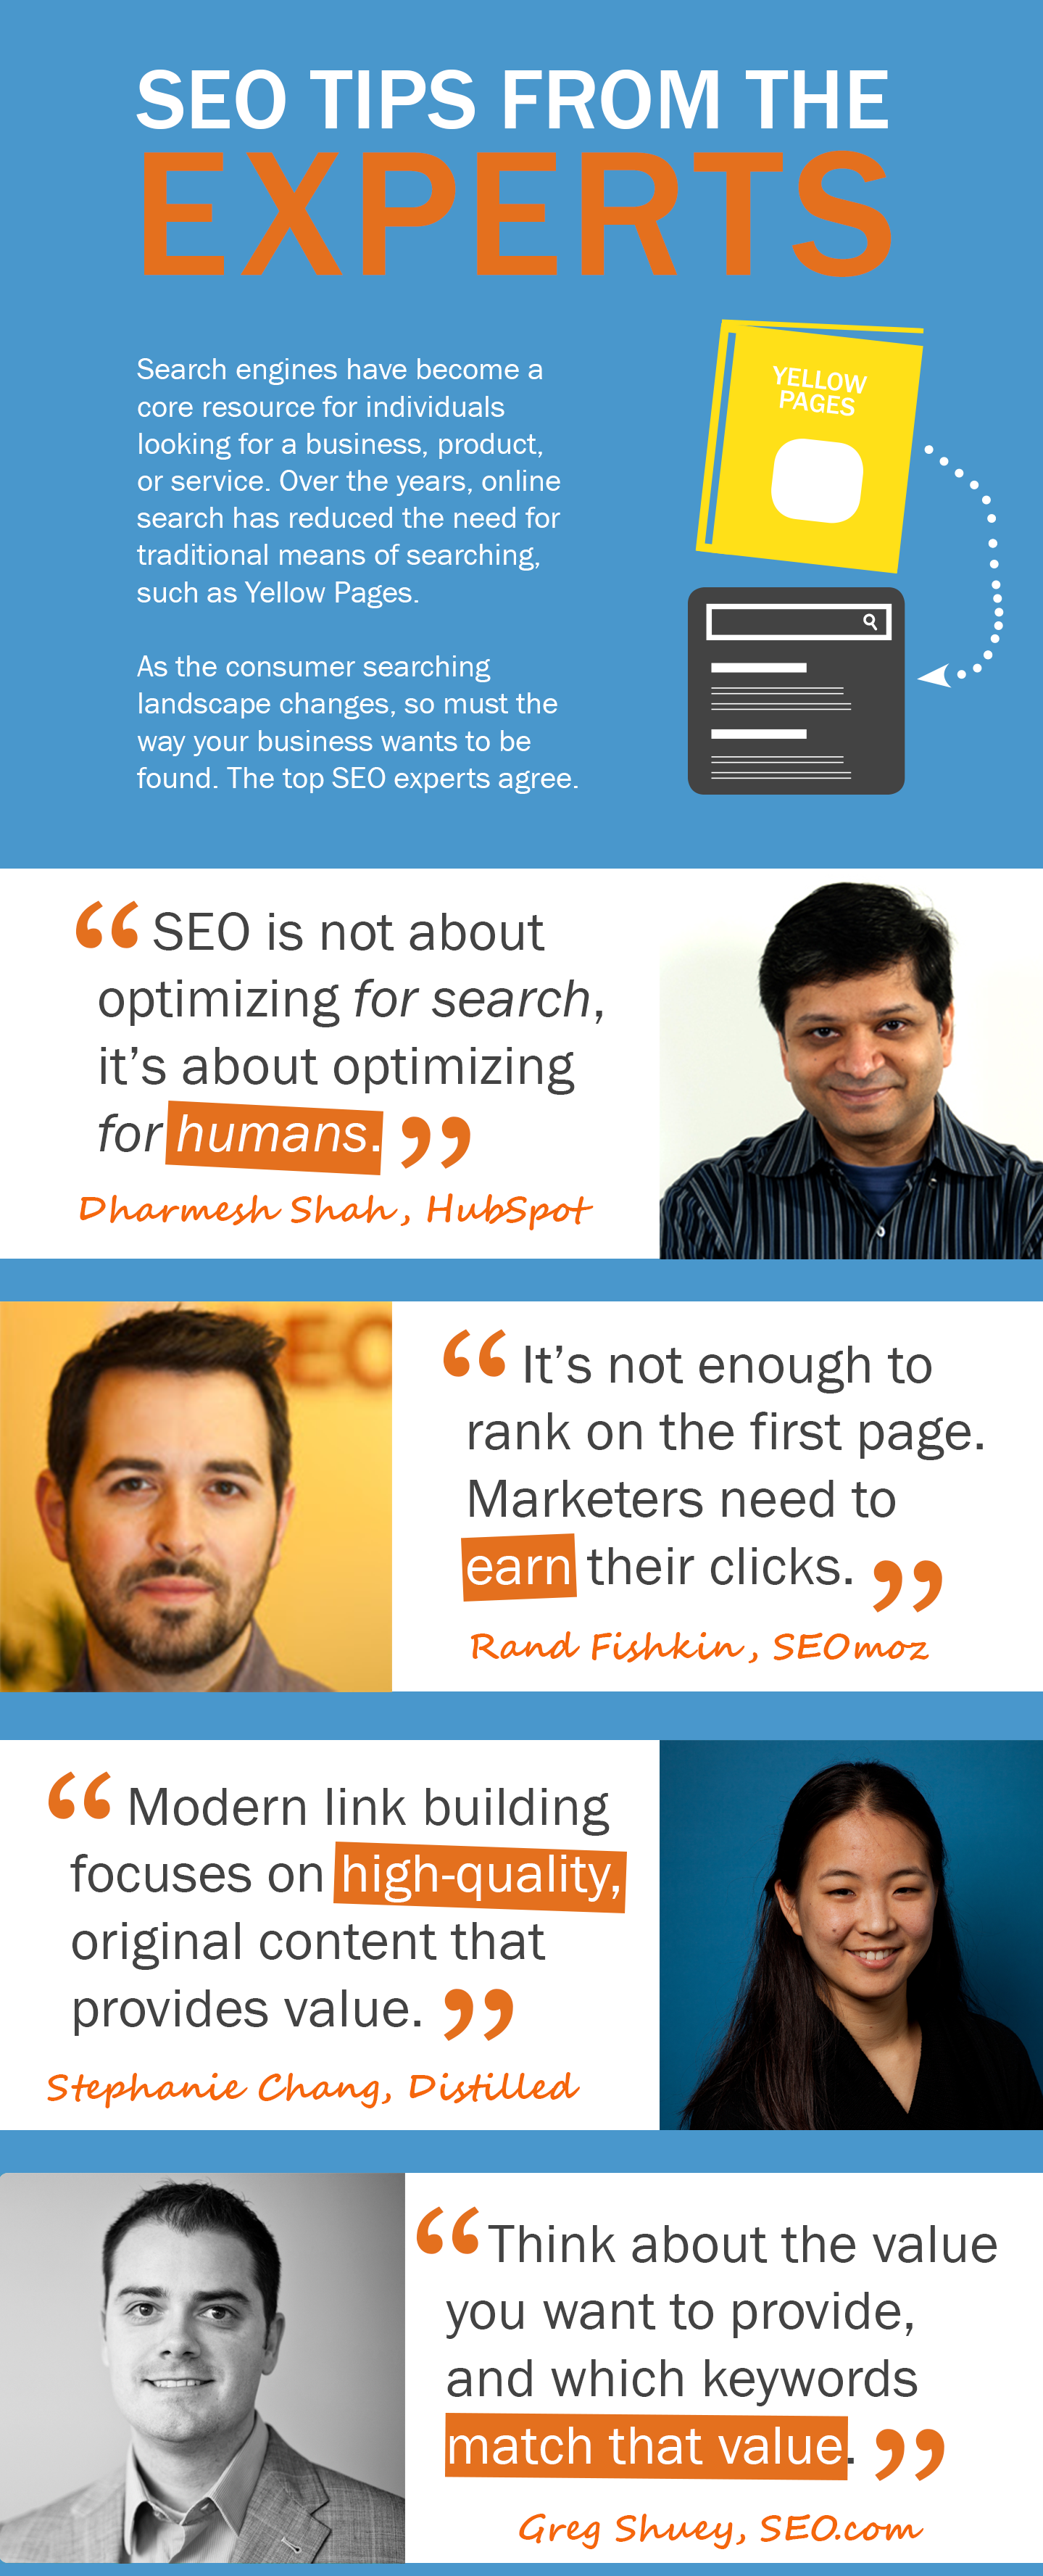 How to Find a Good SEO Expert for Your Business